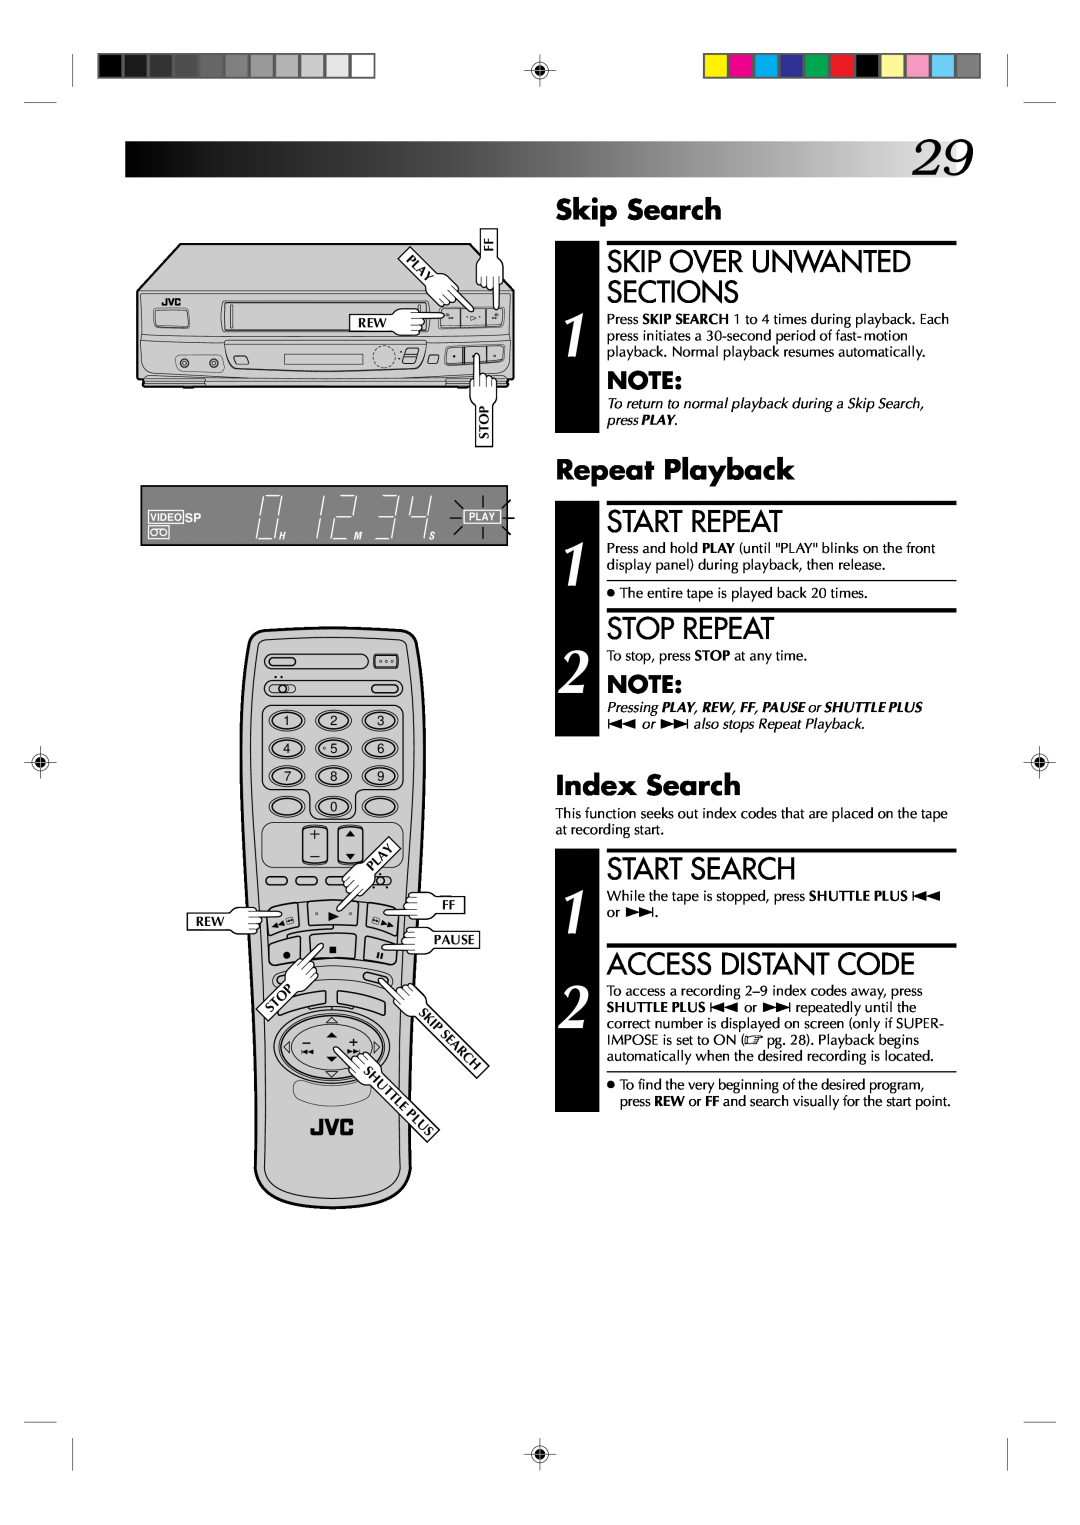 JVC HR-VP434U Skip Over Unwanted Sections, Start Repeat, Stop Repeat, Start Search, Access Distant Code, Skip Search, Plus 